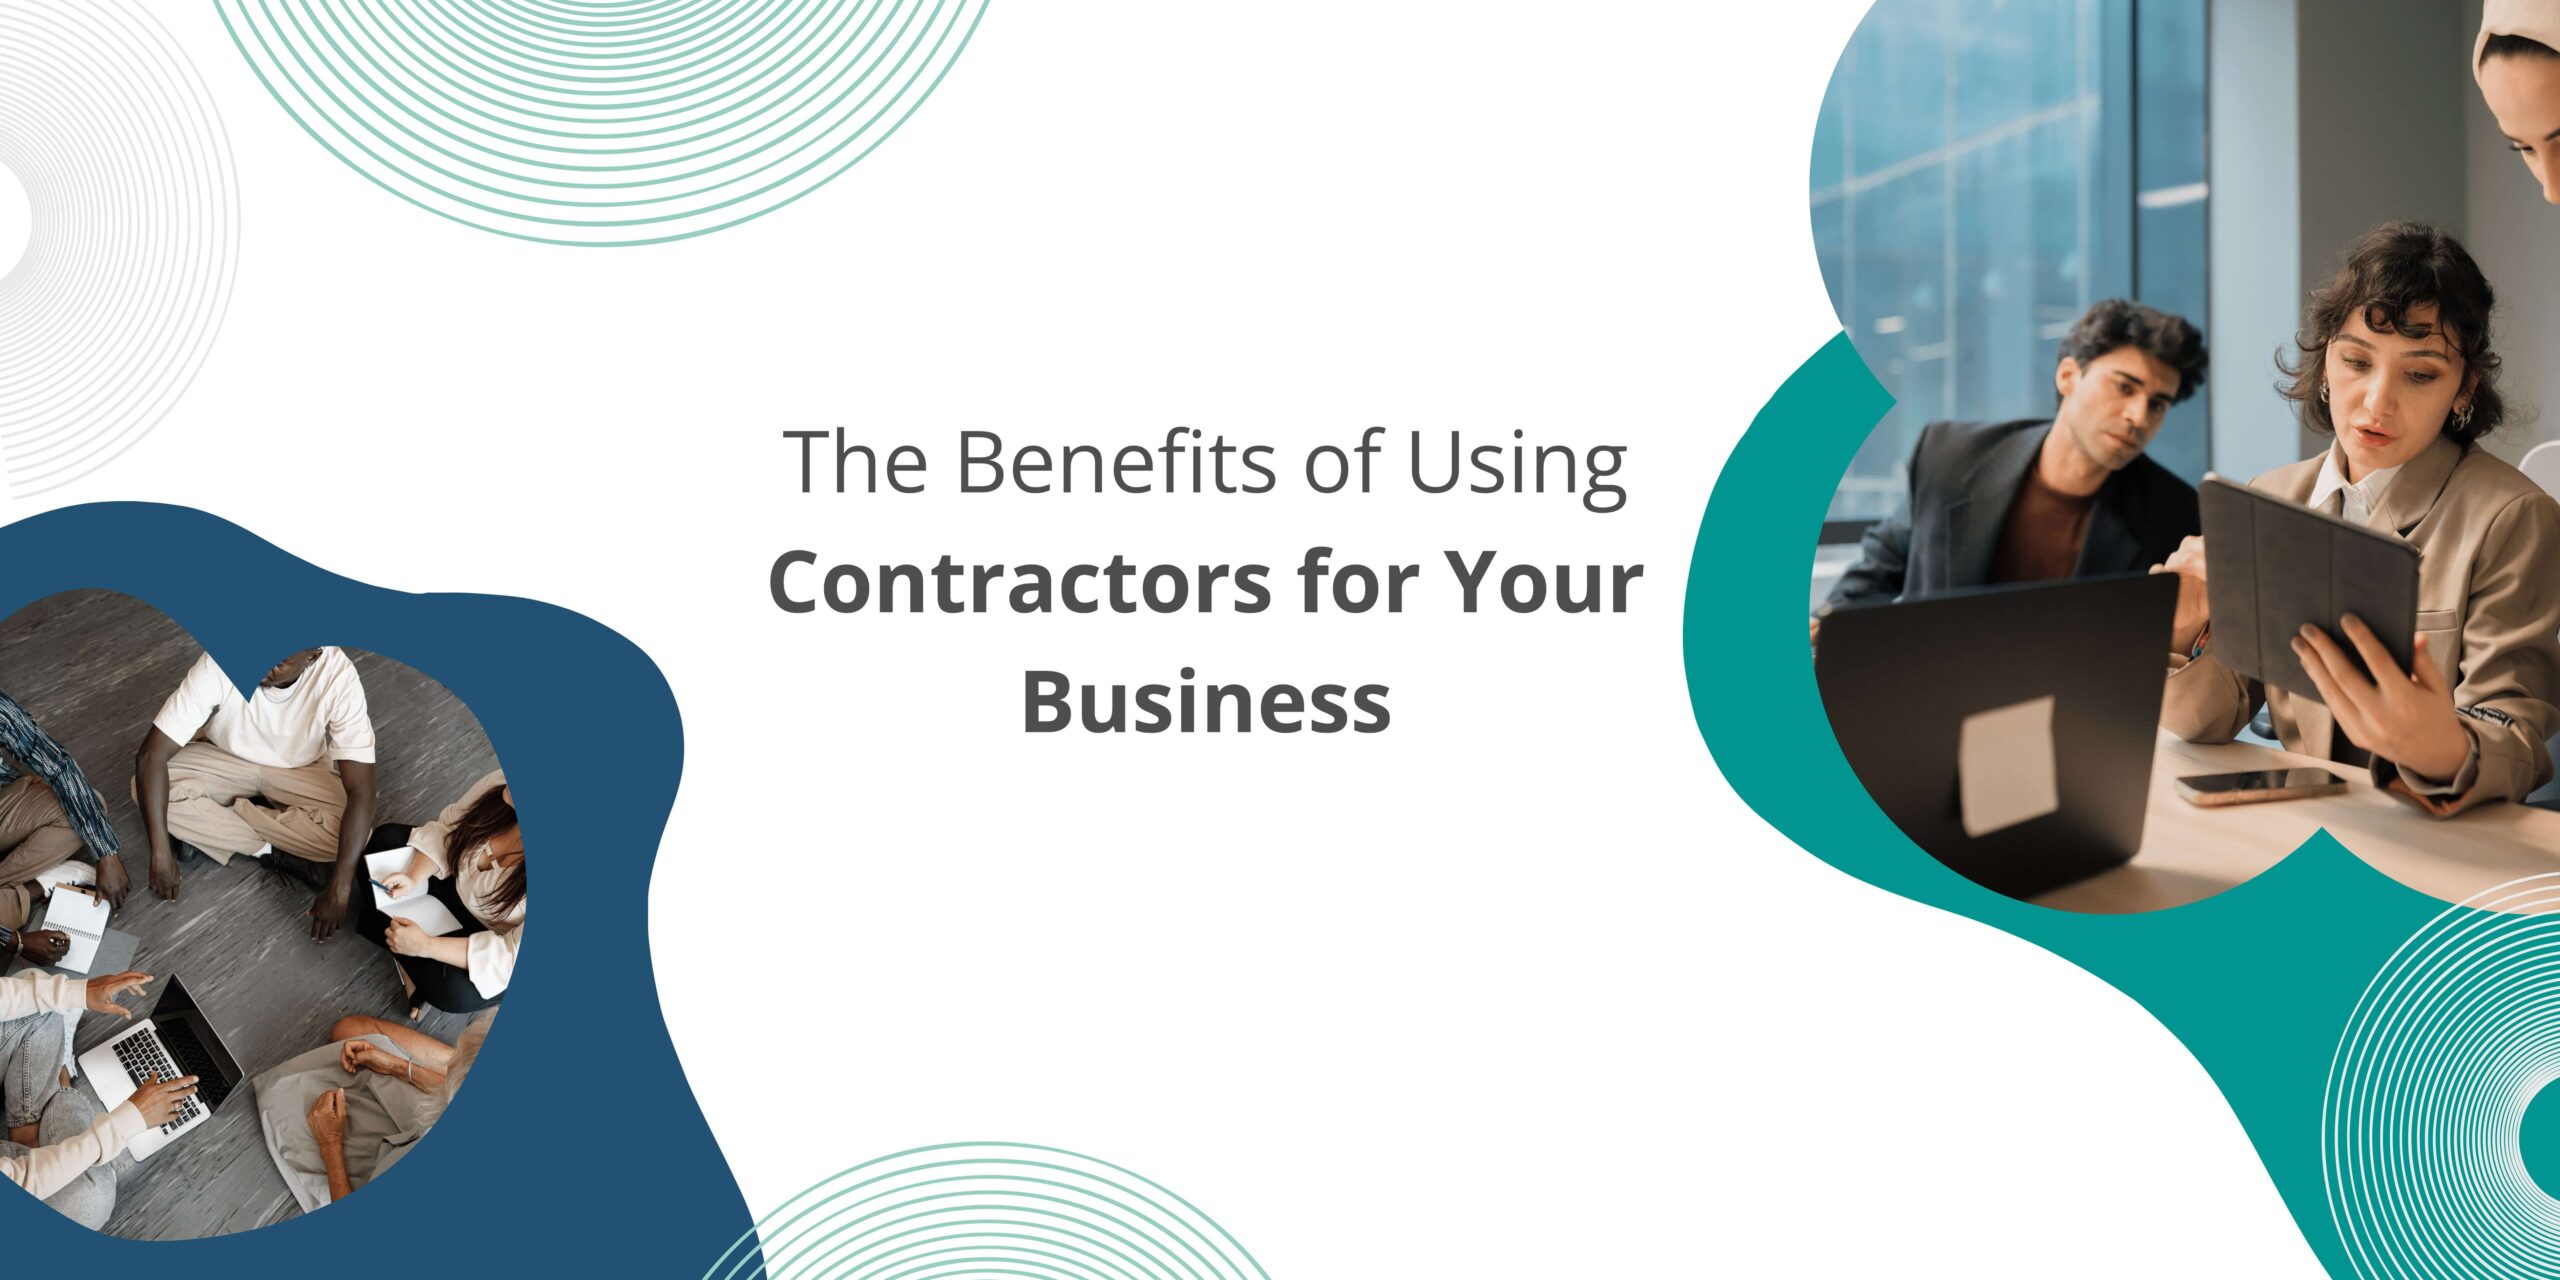 The Benefits of Using Contractors for Your Business